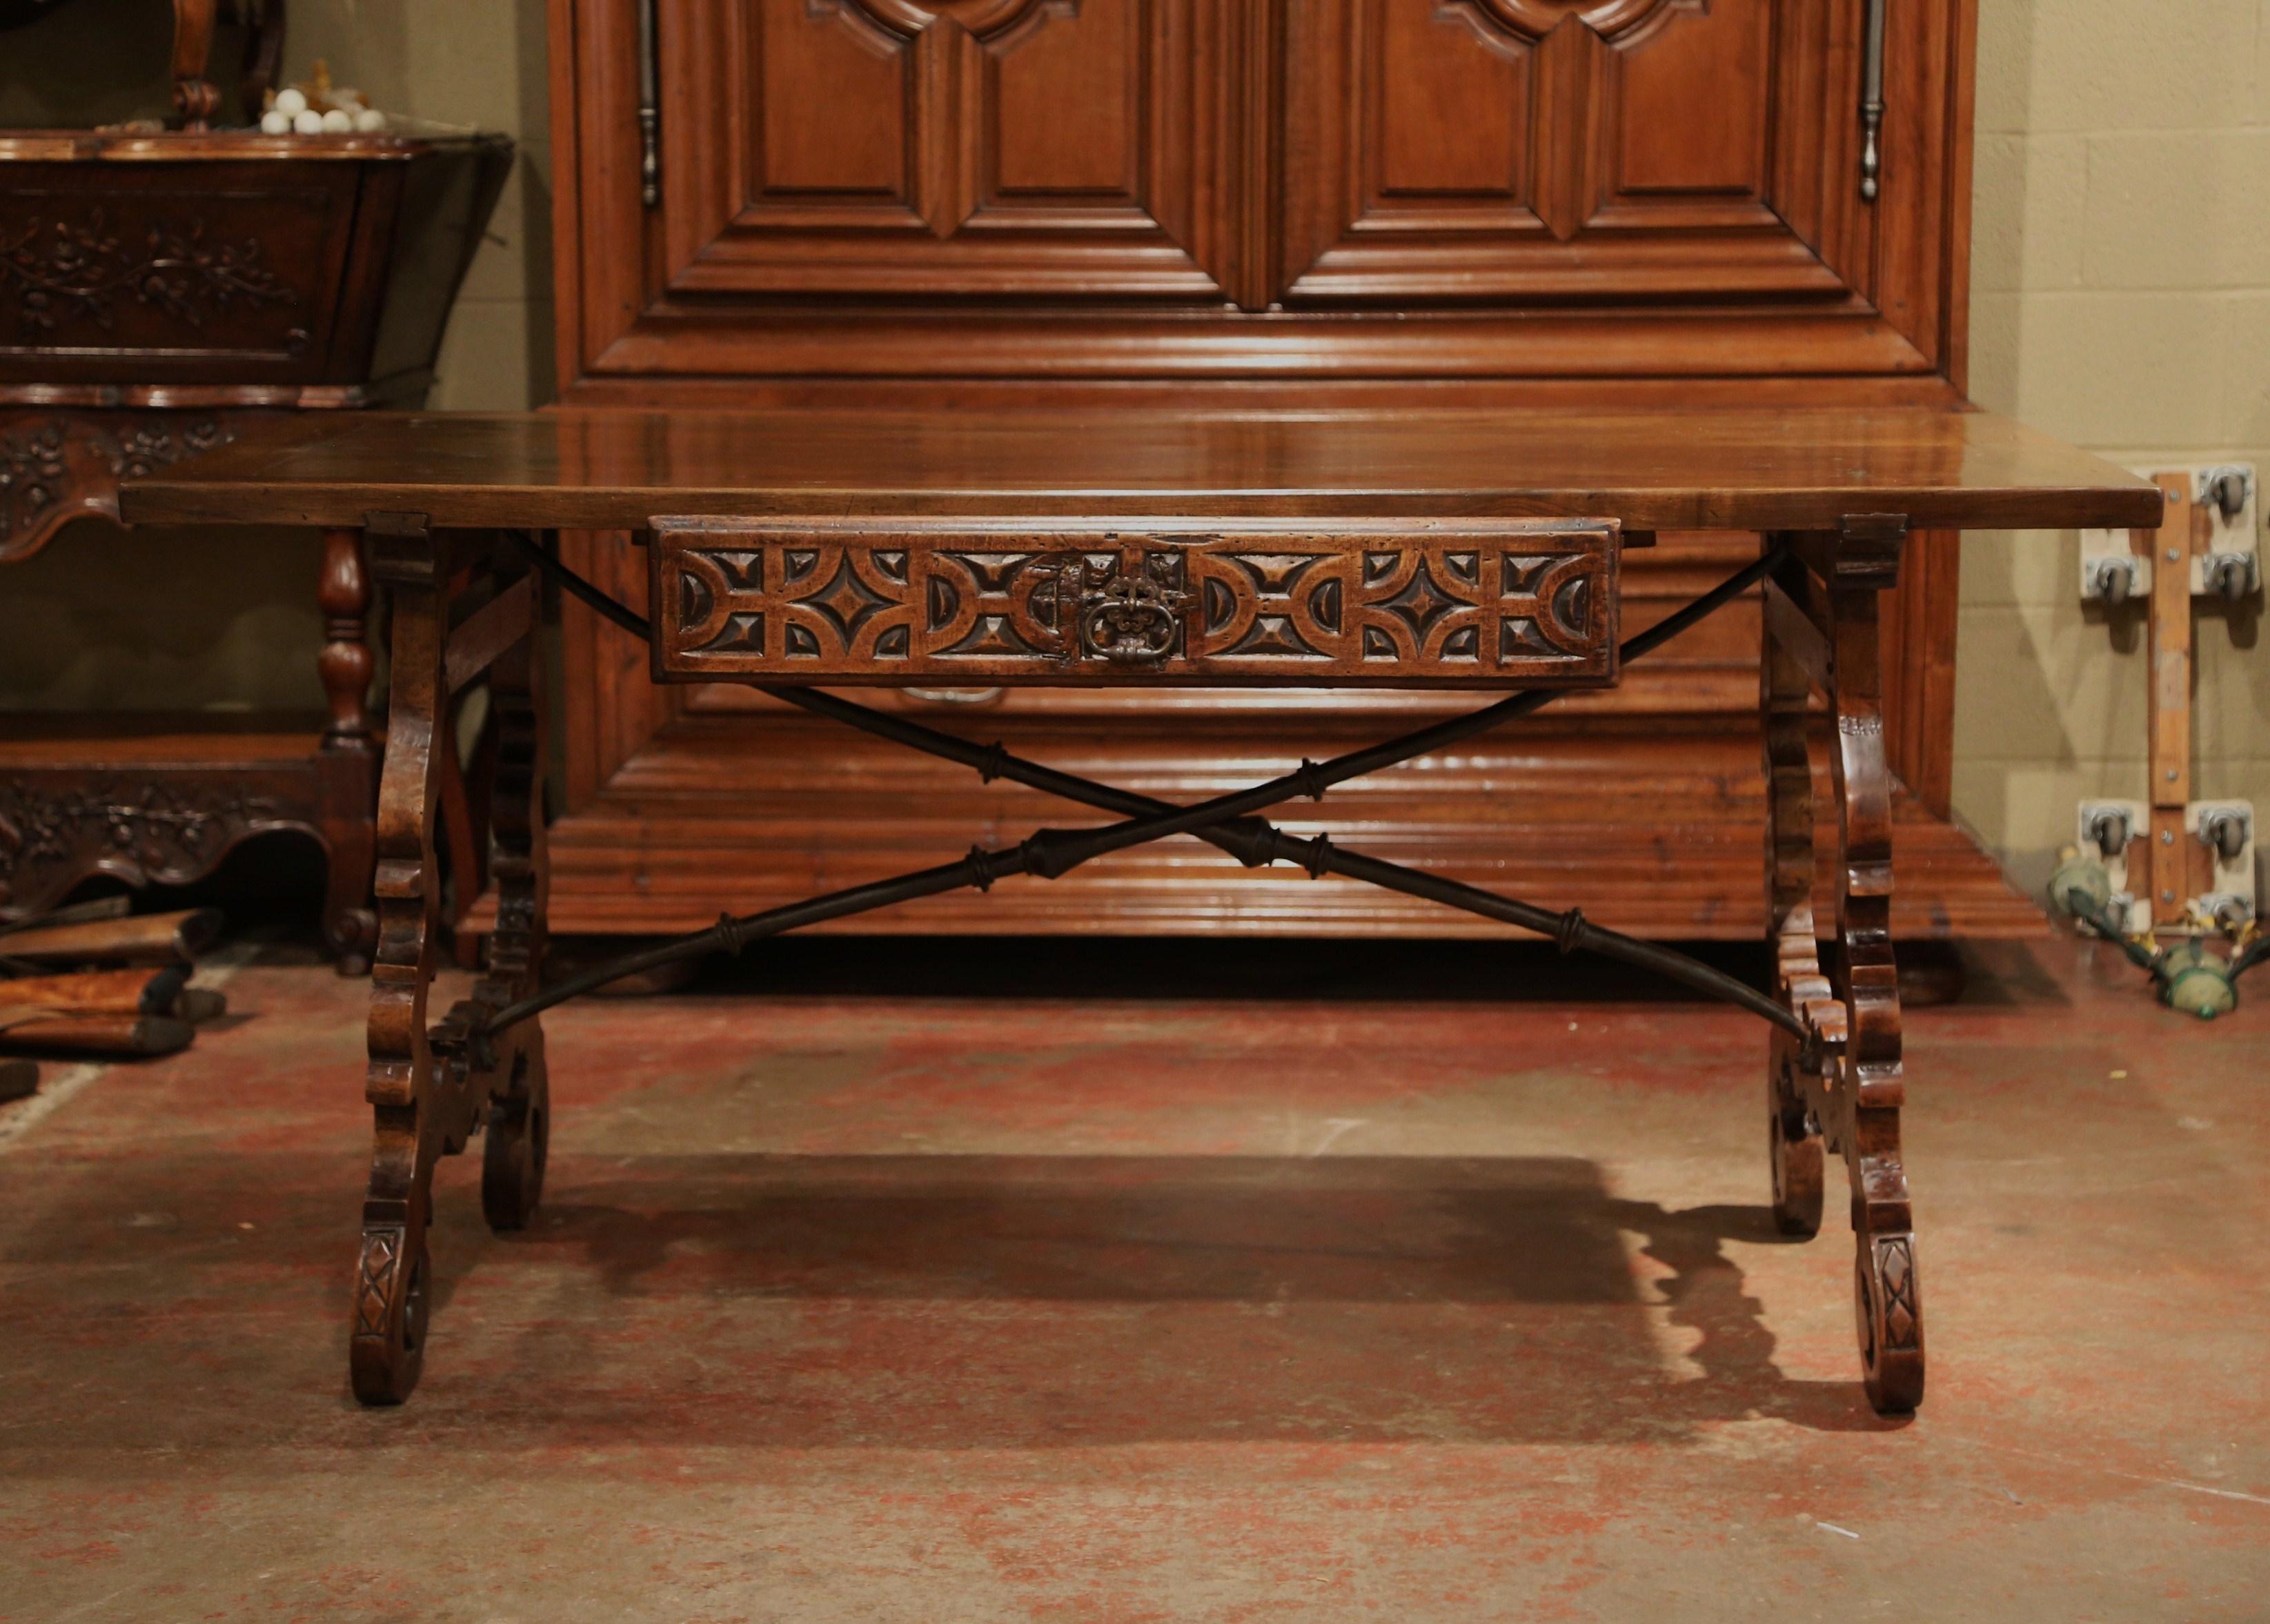 Add an elegant focal point to your study or library with this antique Spanish carved fruit wood desk. Carved in Spain circa 1850, the trestle table sits on two intricate legs, which are connected with a thick, forged wrought iron stretcher. The desk